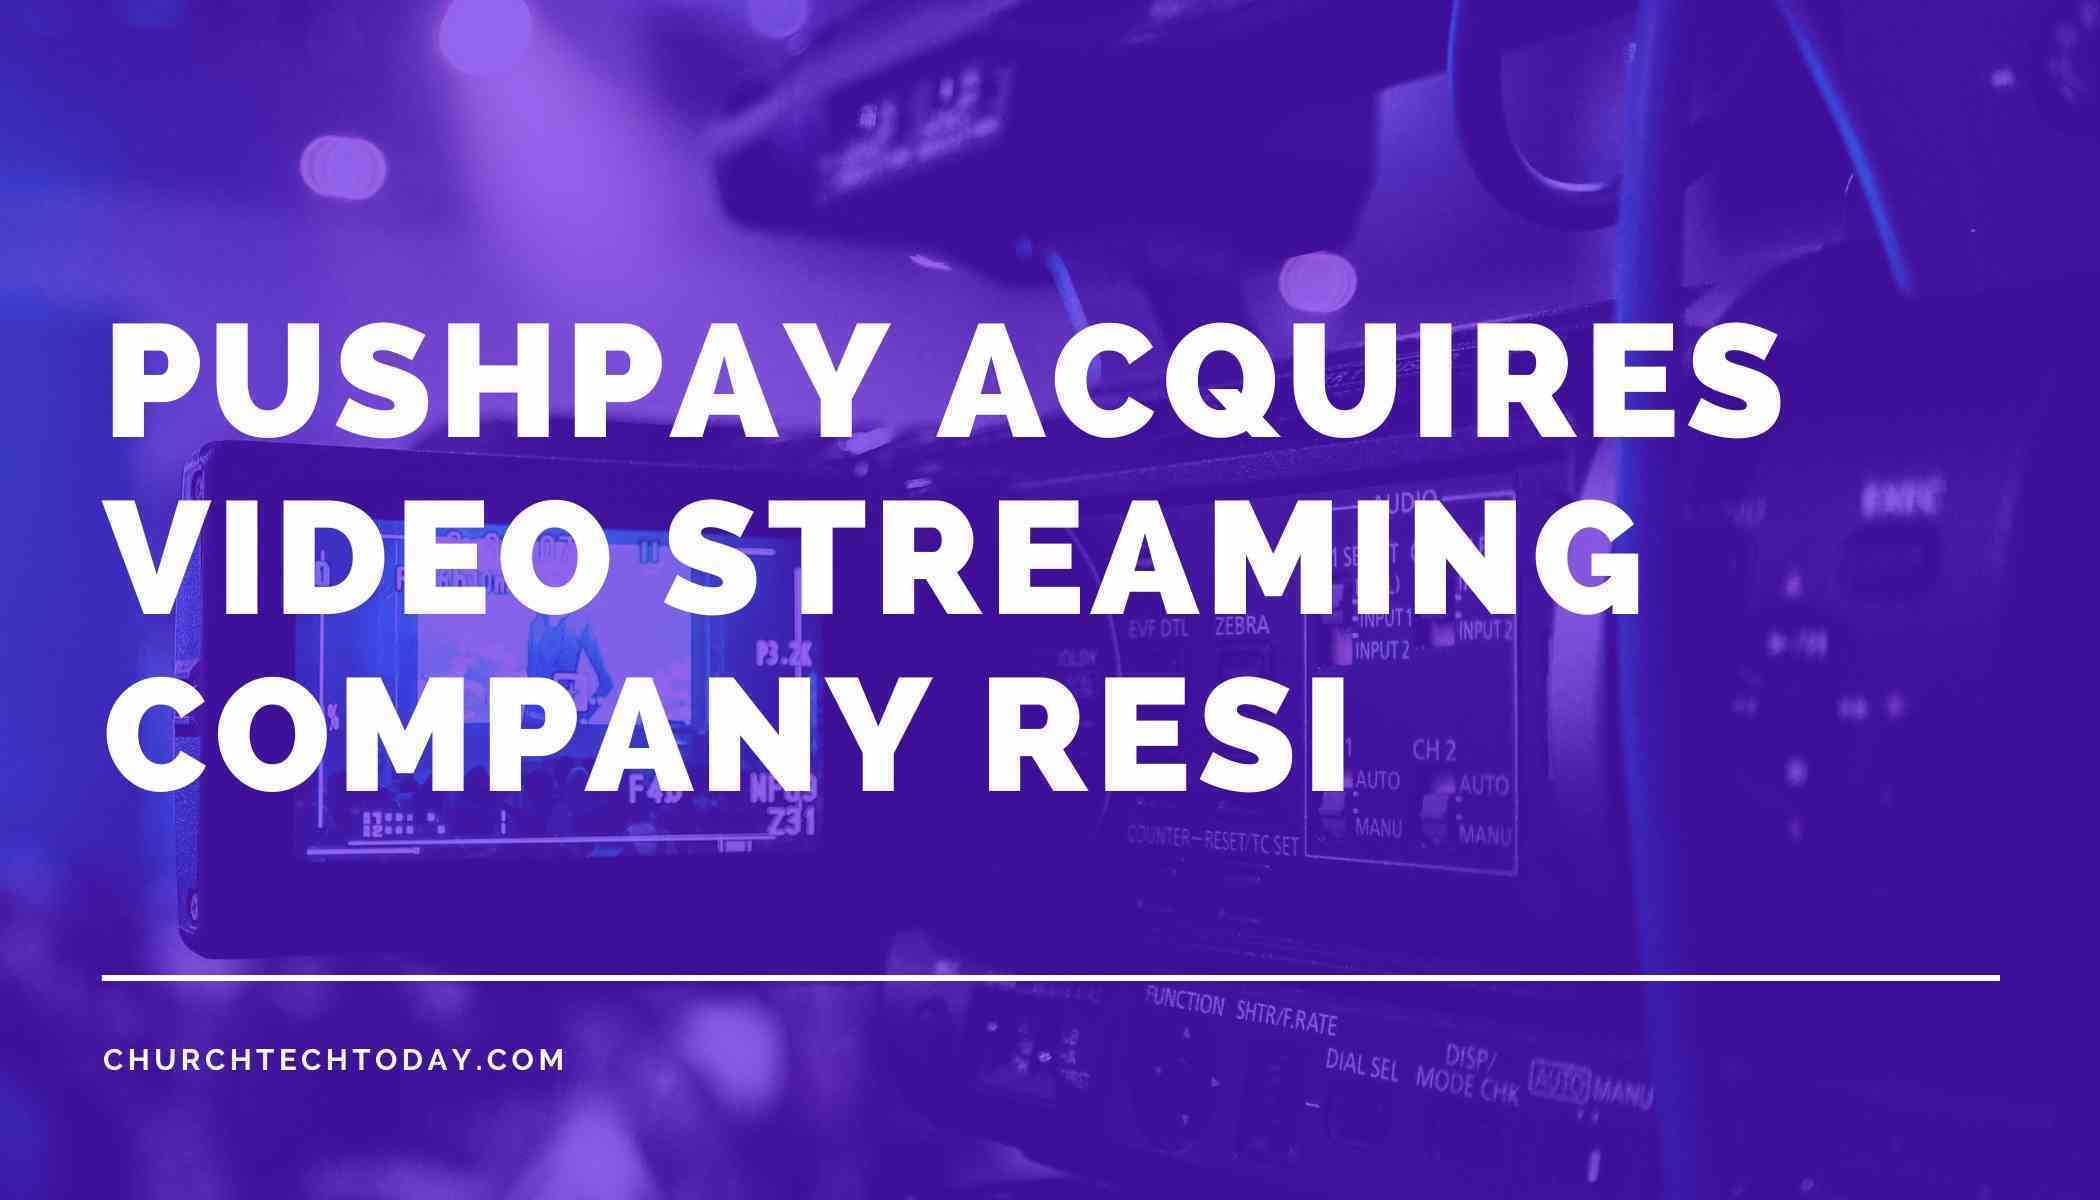 Pushpay acquires video streaming company Resi Media